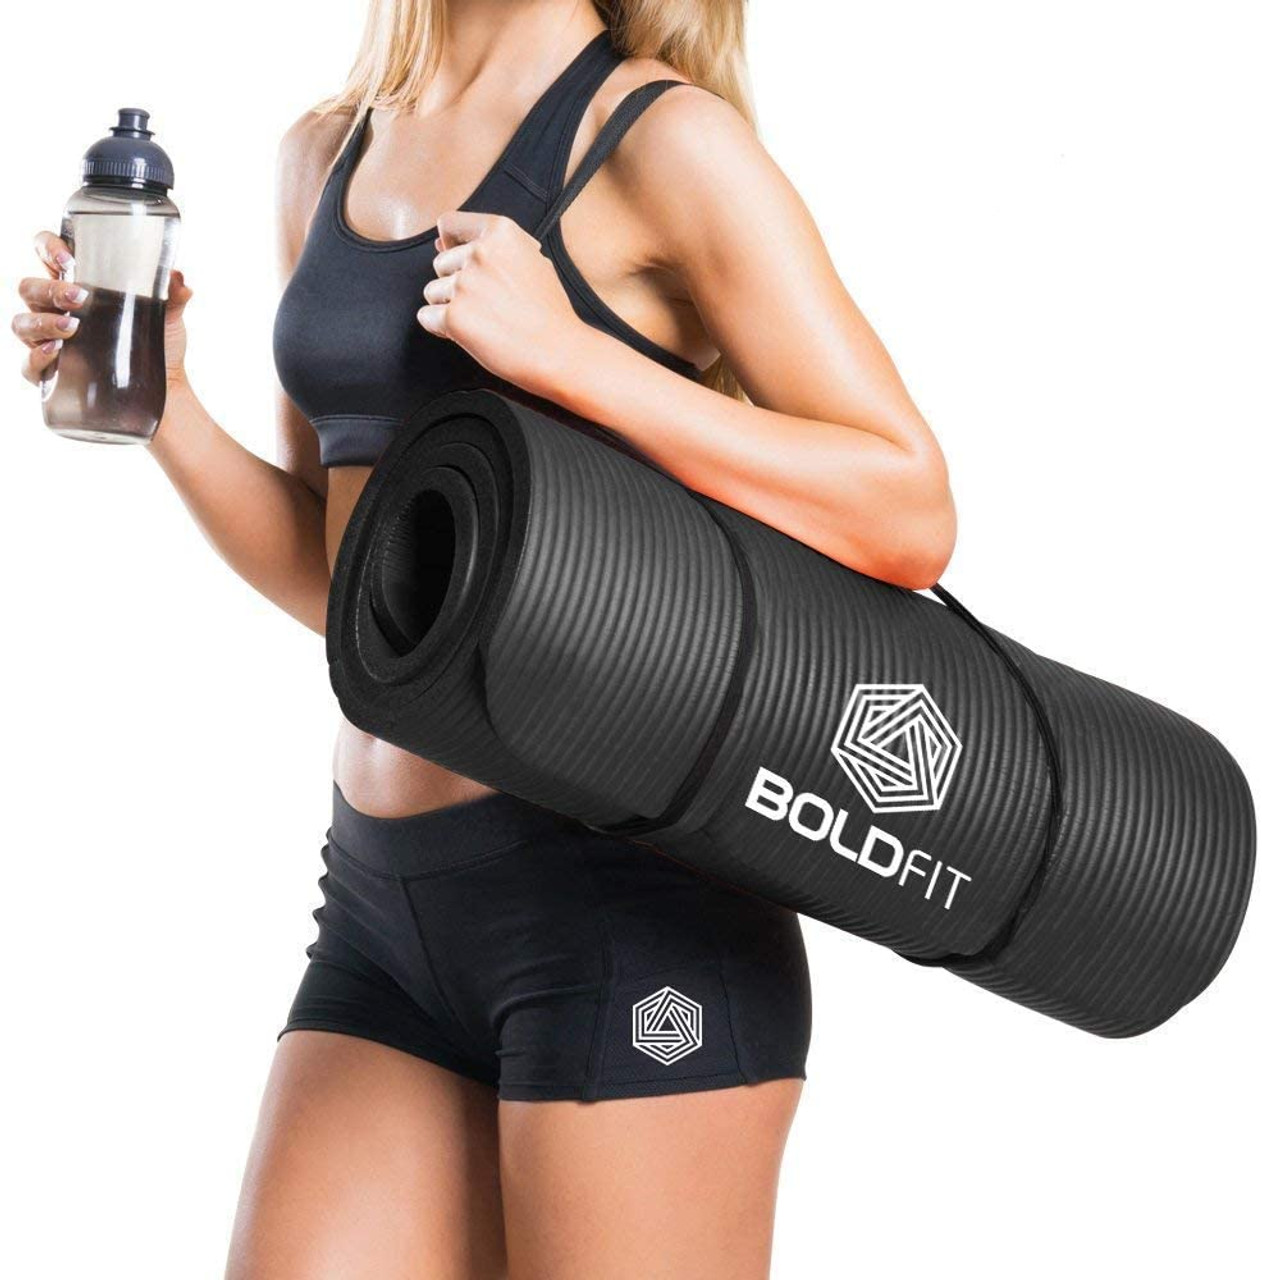 Boldfit Yoga Mat for men and women NBR Material with Carrying Strap, 1/2  Inch (12mm)